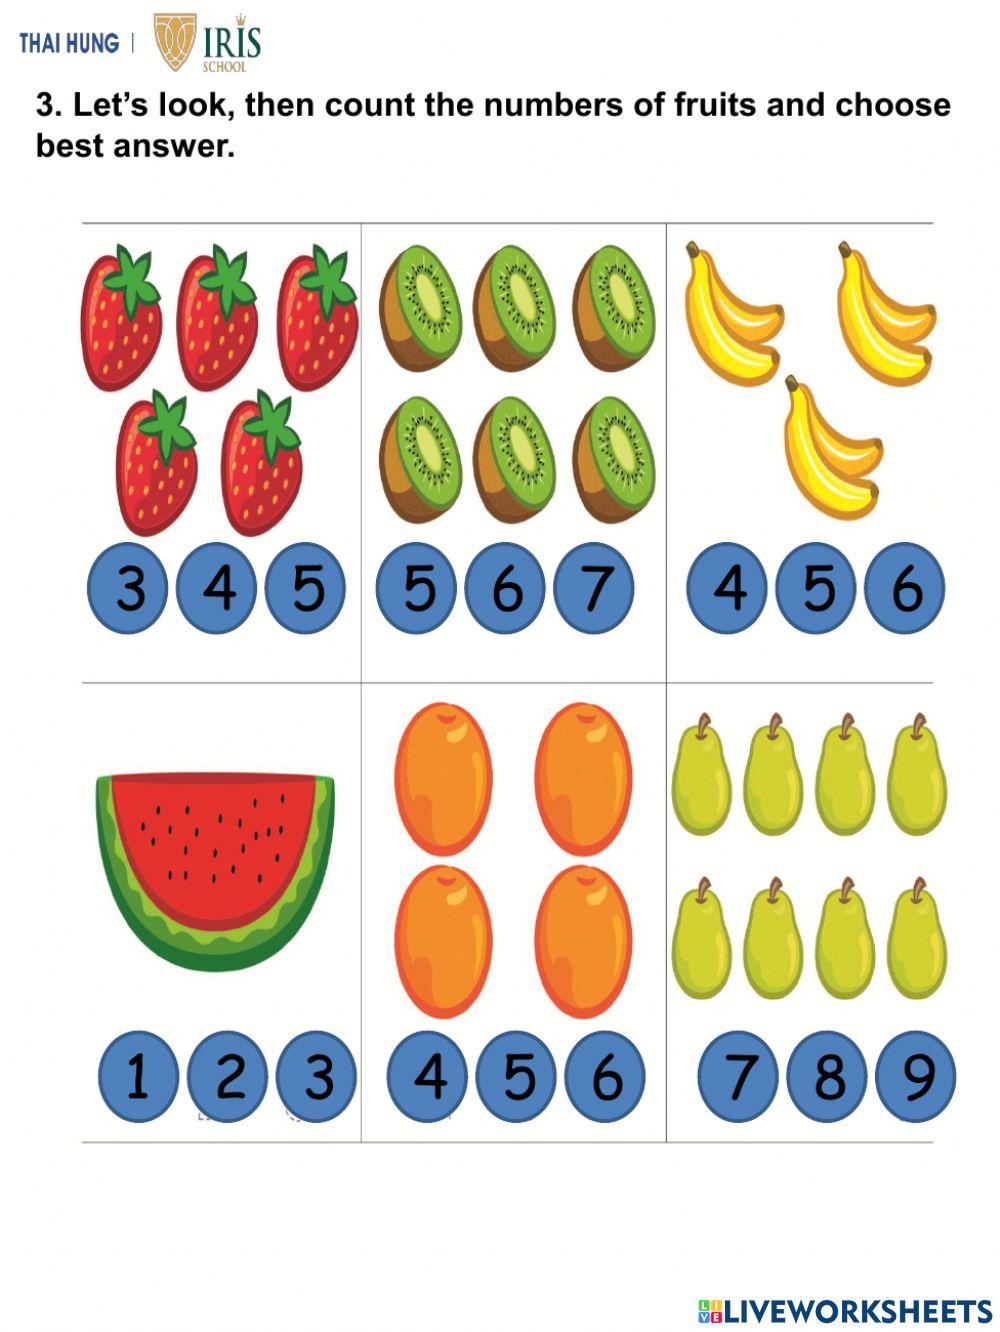 Moon-Worksheet about Fruits for Kids